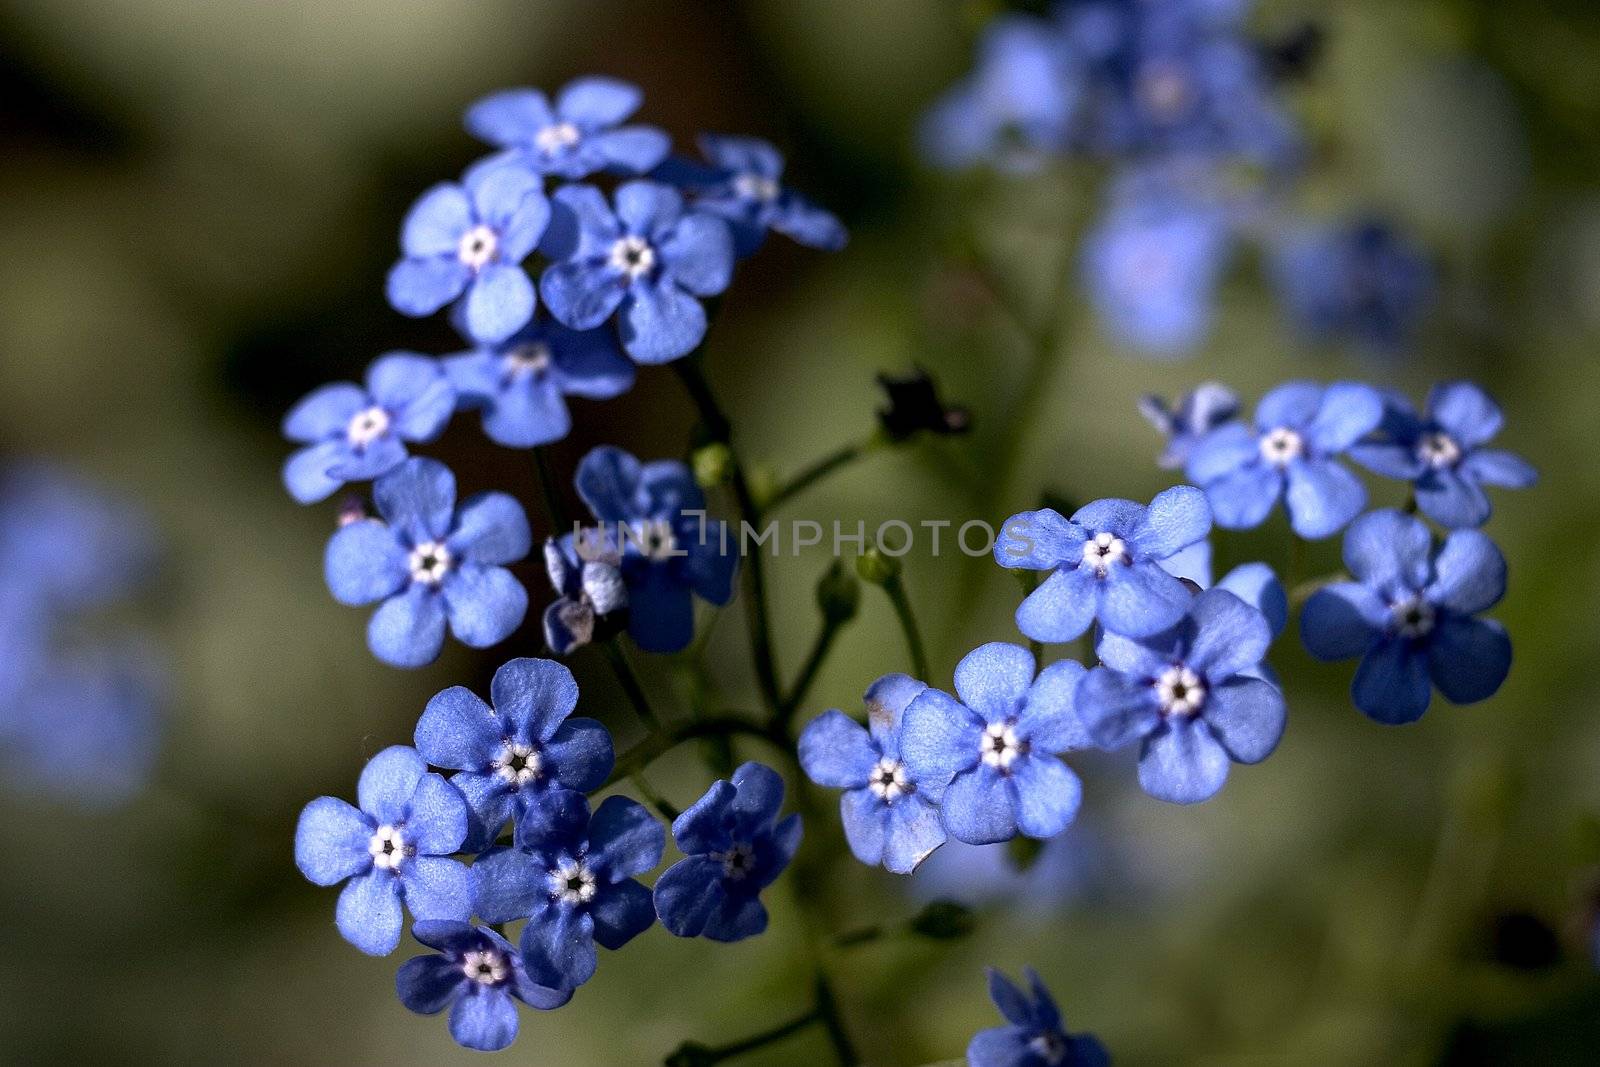 Forget Me Not by miradrozdowski